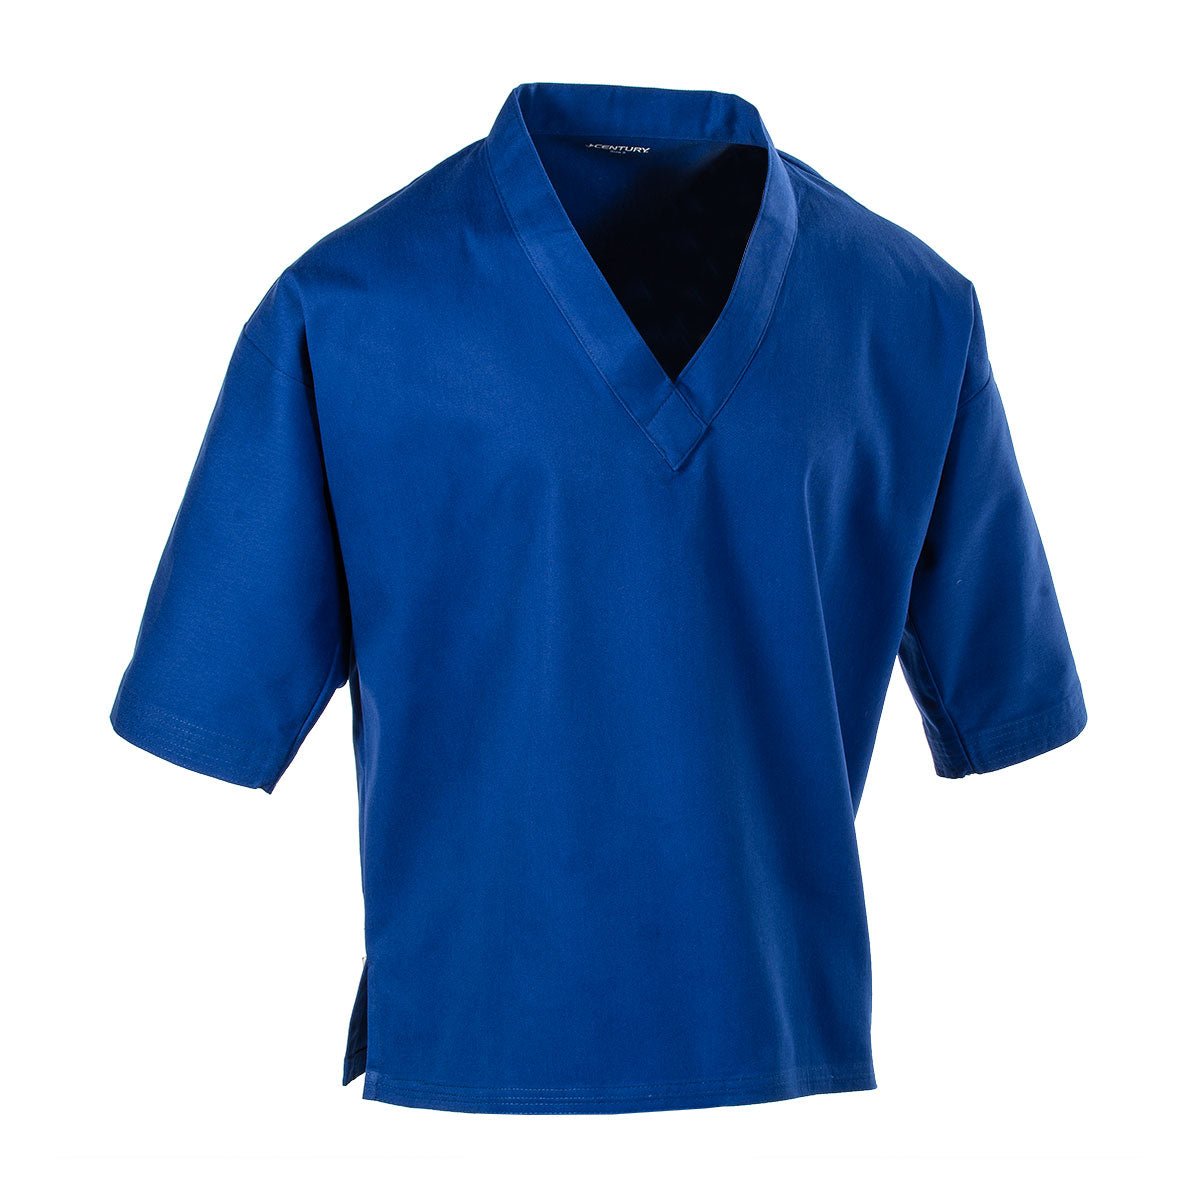 8 oz. Middleweight Brushed Cotton Pullover Top Blue